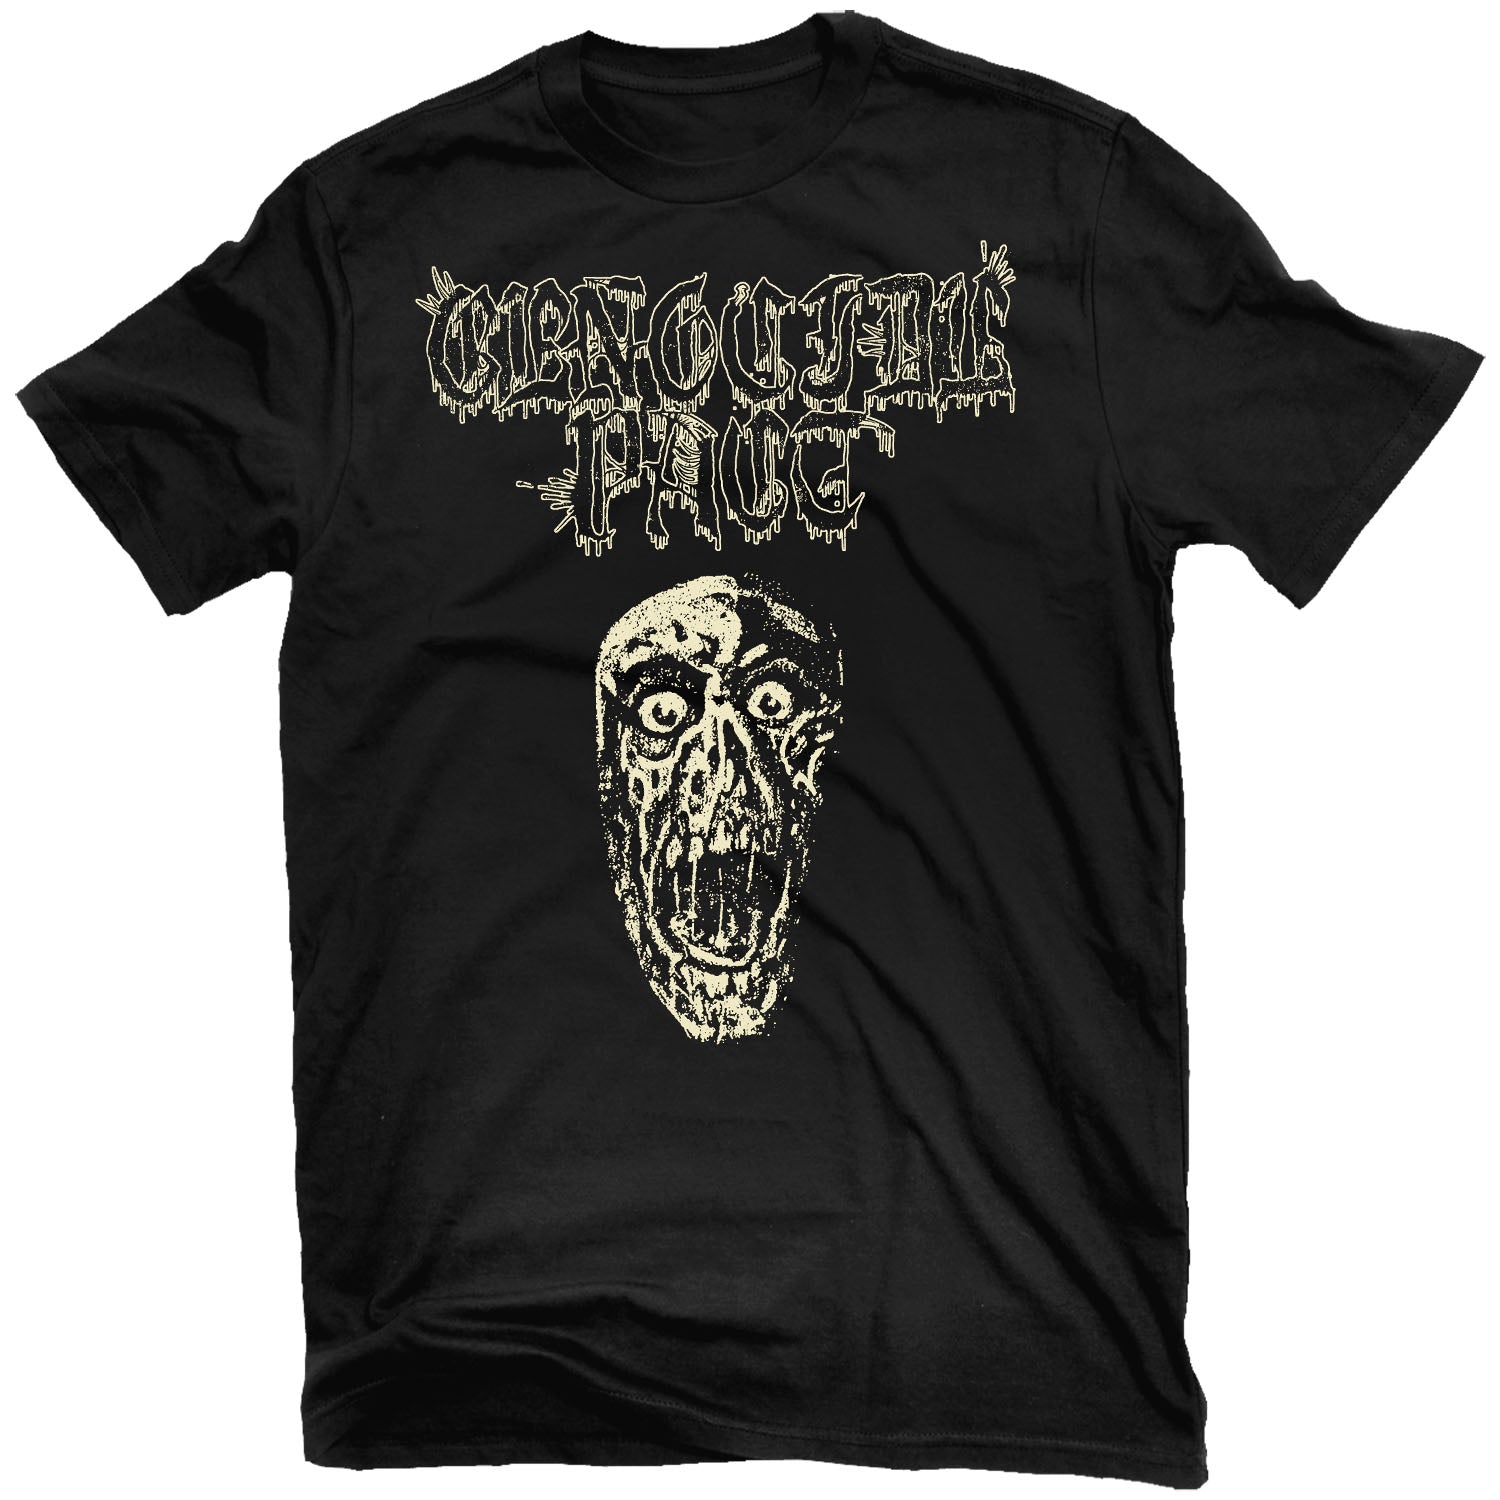 Genocide Pact "Order of Torment" T-Shirt